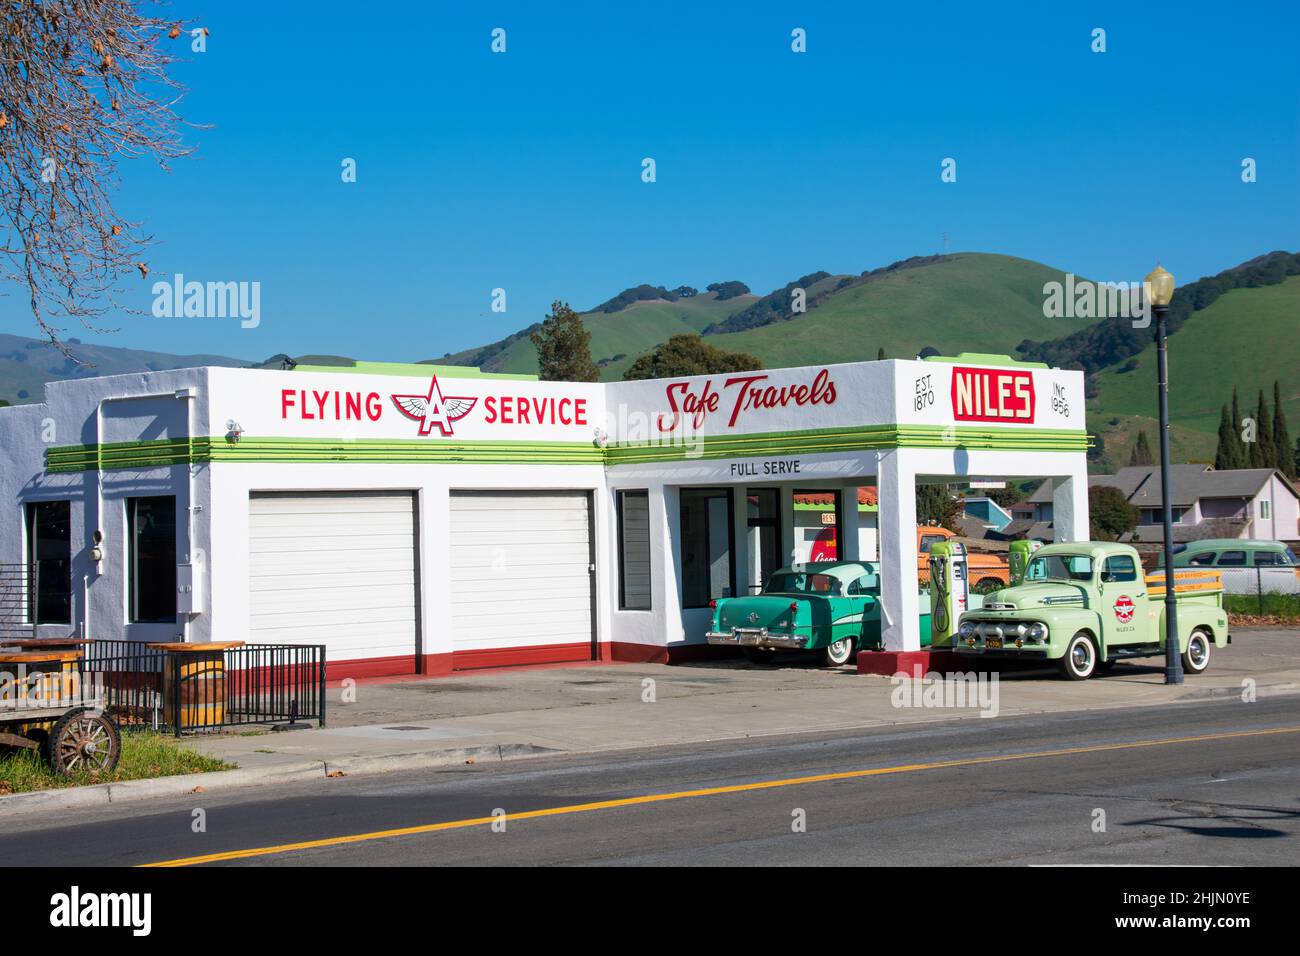 Niles Flying A restored historic gas station and repair shop facade and exterior - Fremont, California, USA - 2022 Stock Photo